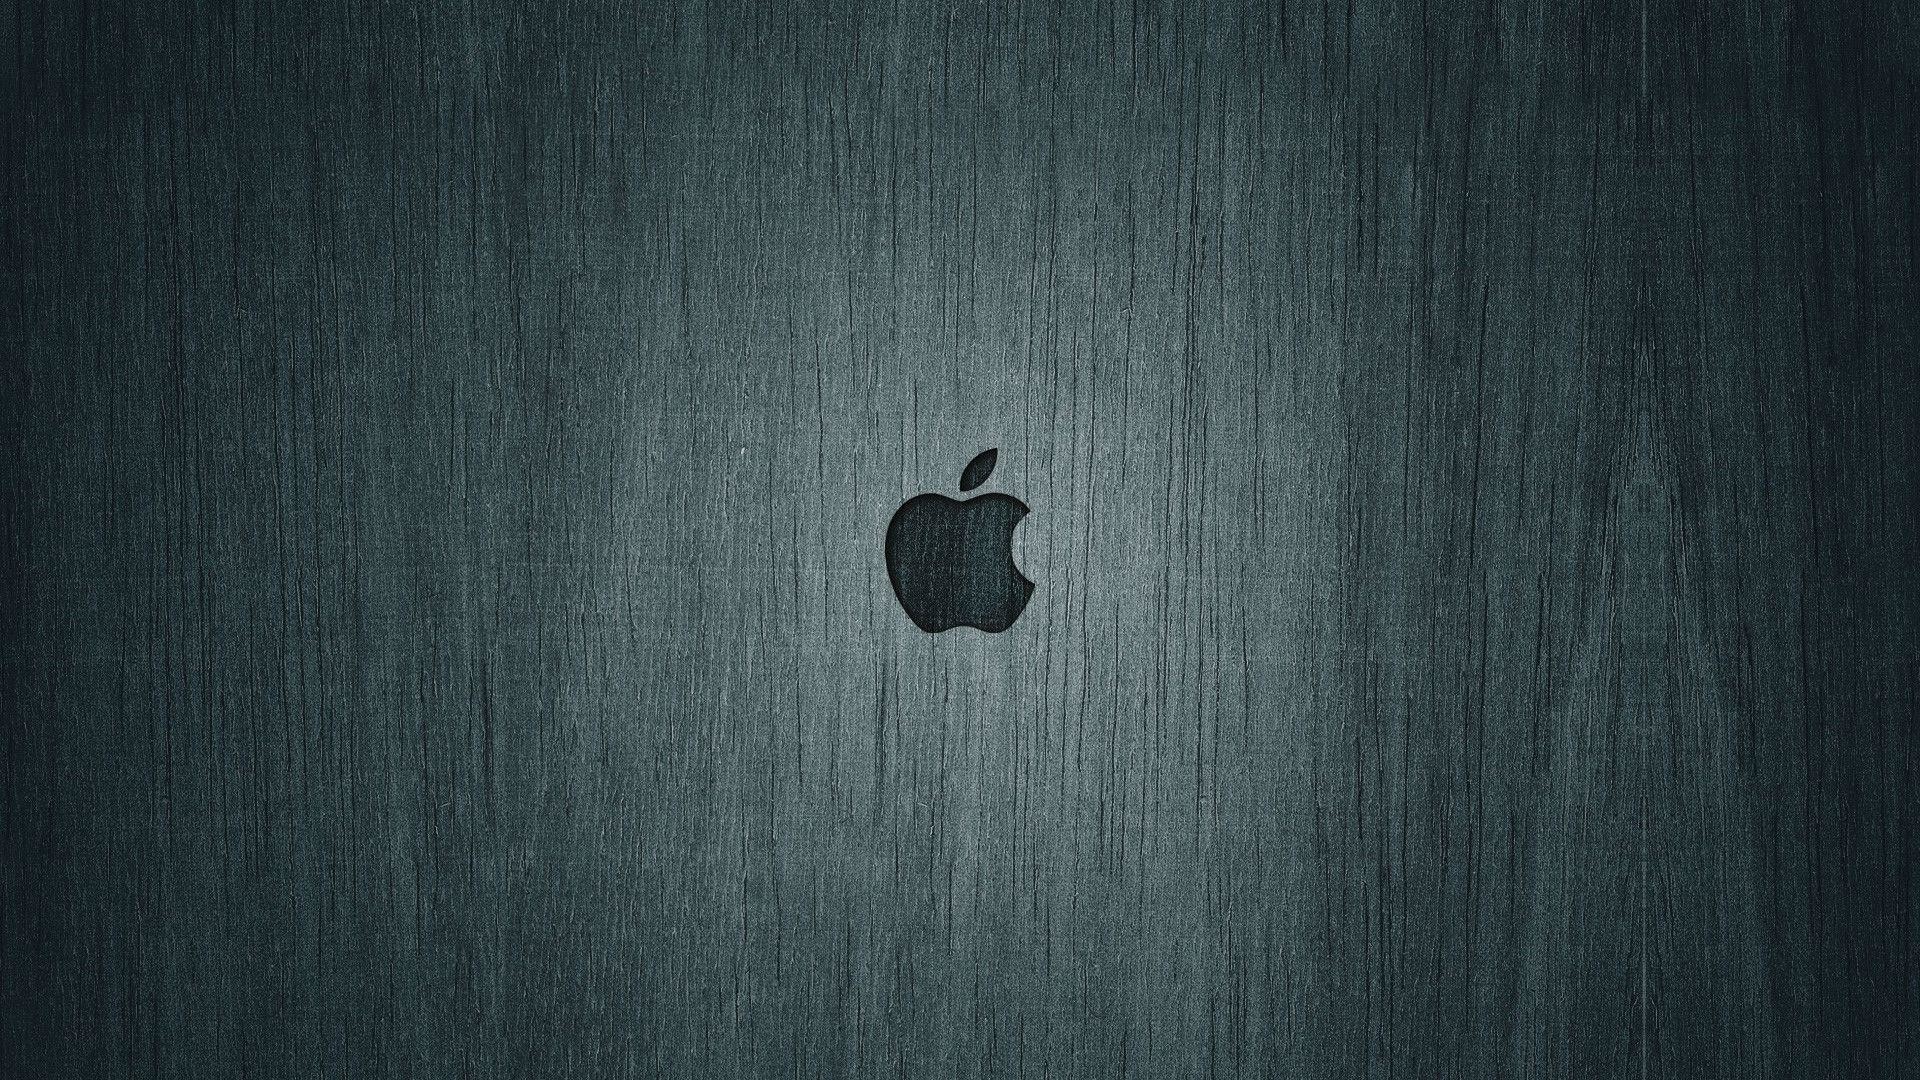 HD Apple Wallpapers 1080p (70+ images)